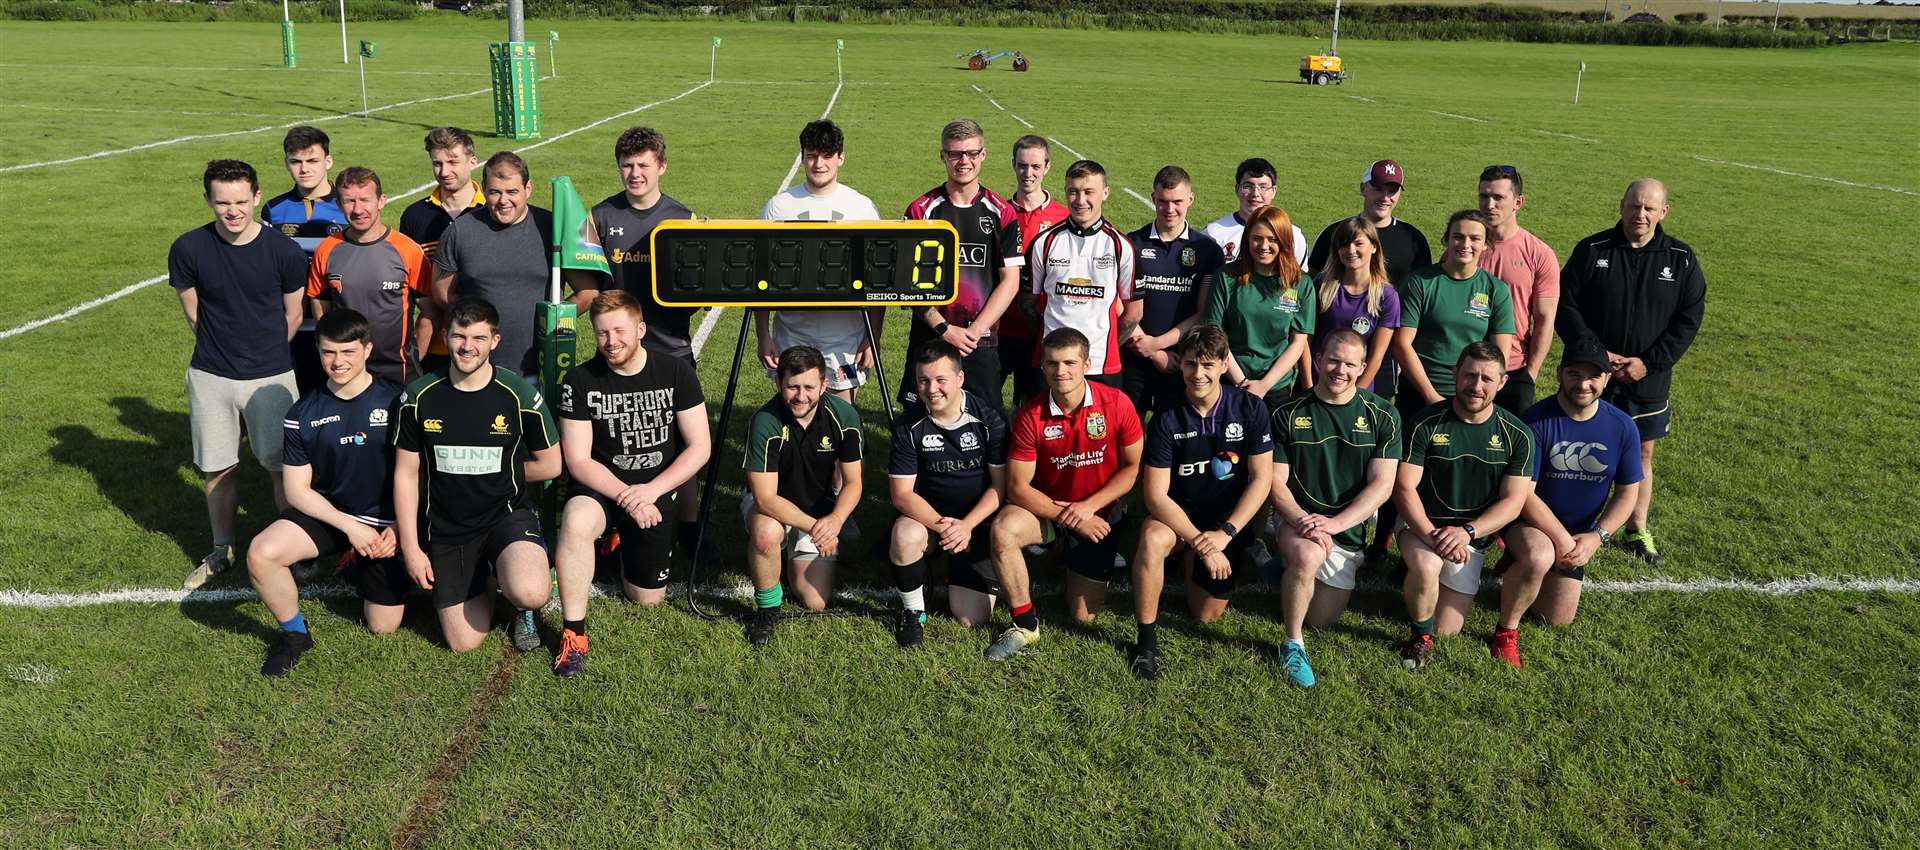 The squad of players line up alongside the electronic clock just before the start of the bid to set a Guinness World Record for touch rugby. Picture: James Gunn